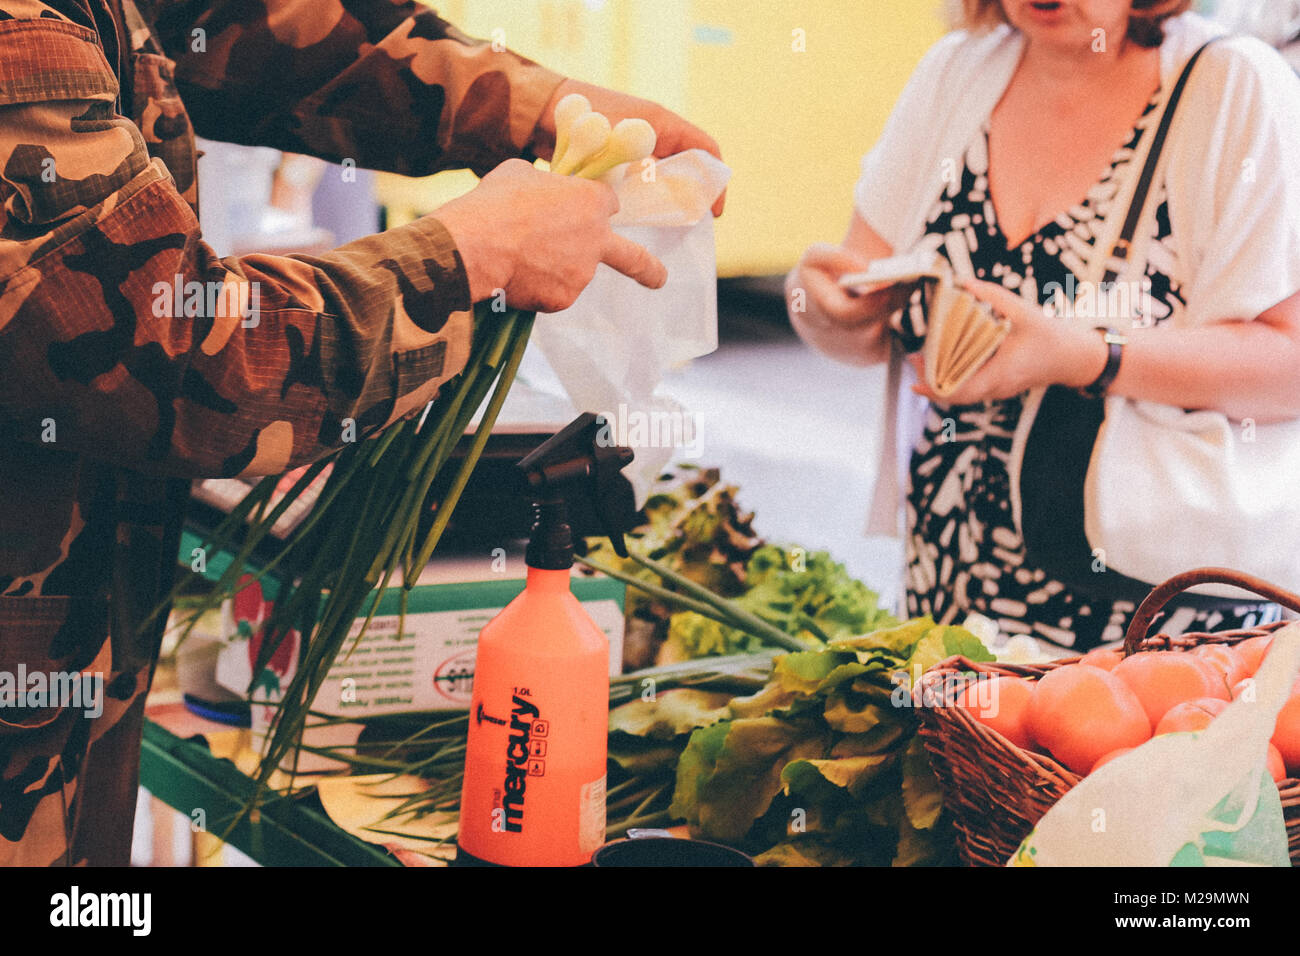 Local Farmers Market. Fresh produce: vegetables, berries, wild flowers. Older people buying groceries. Scales, crates, boxes. Vilnius, Lithuania. Stock Photo